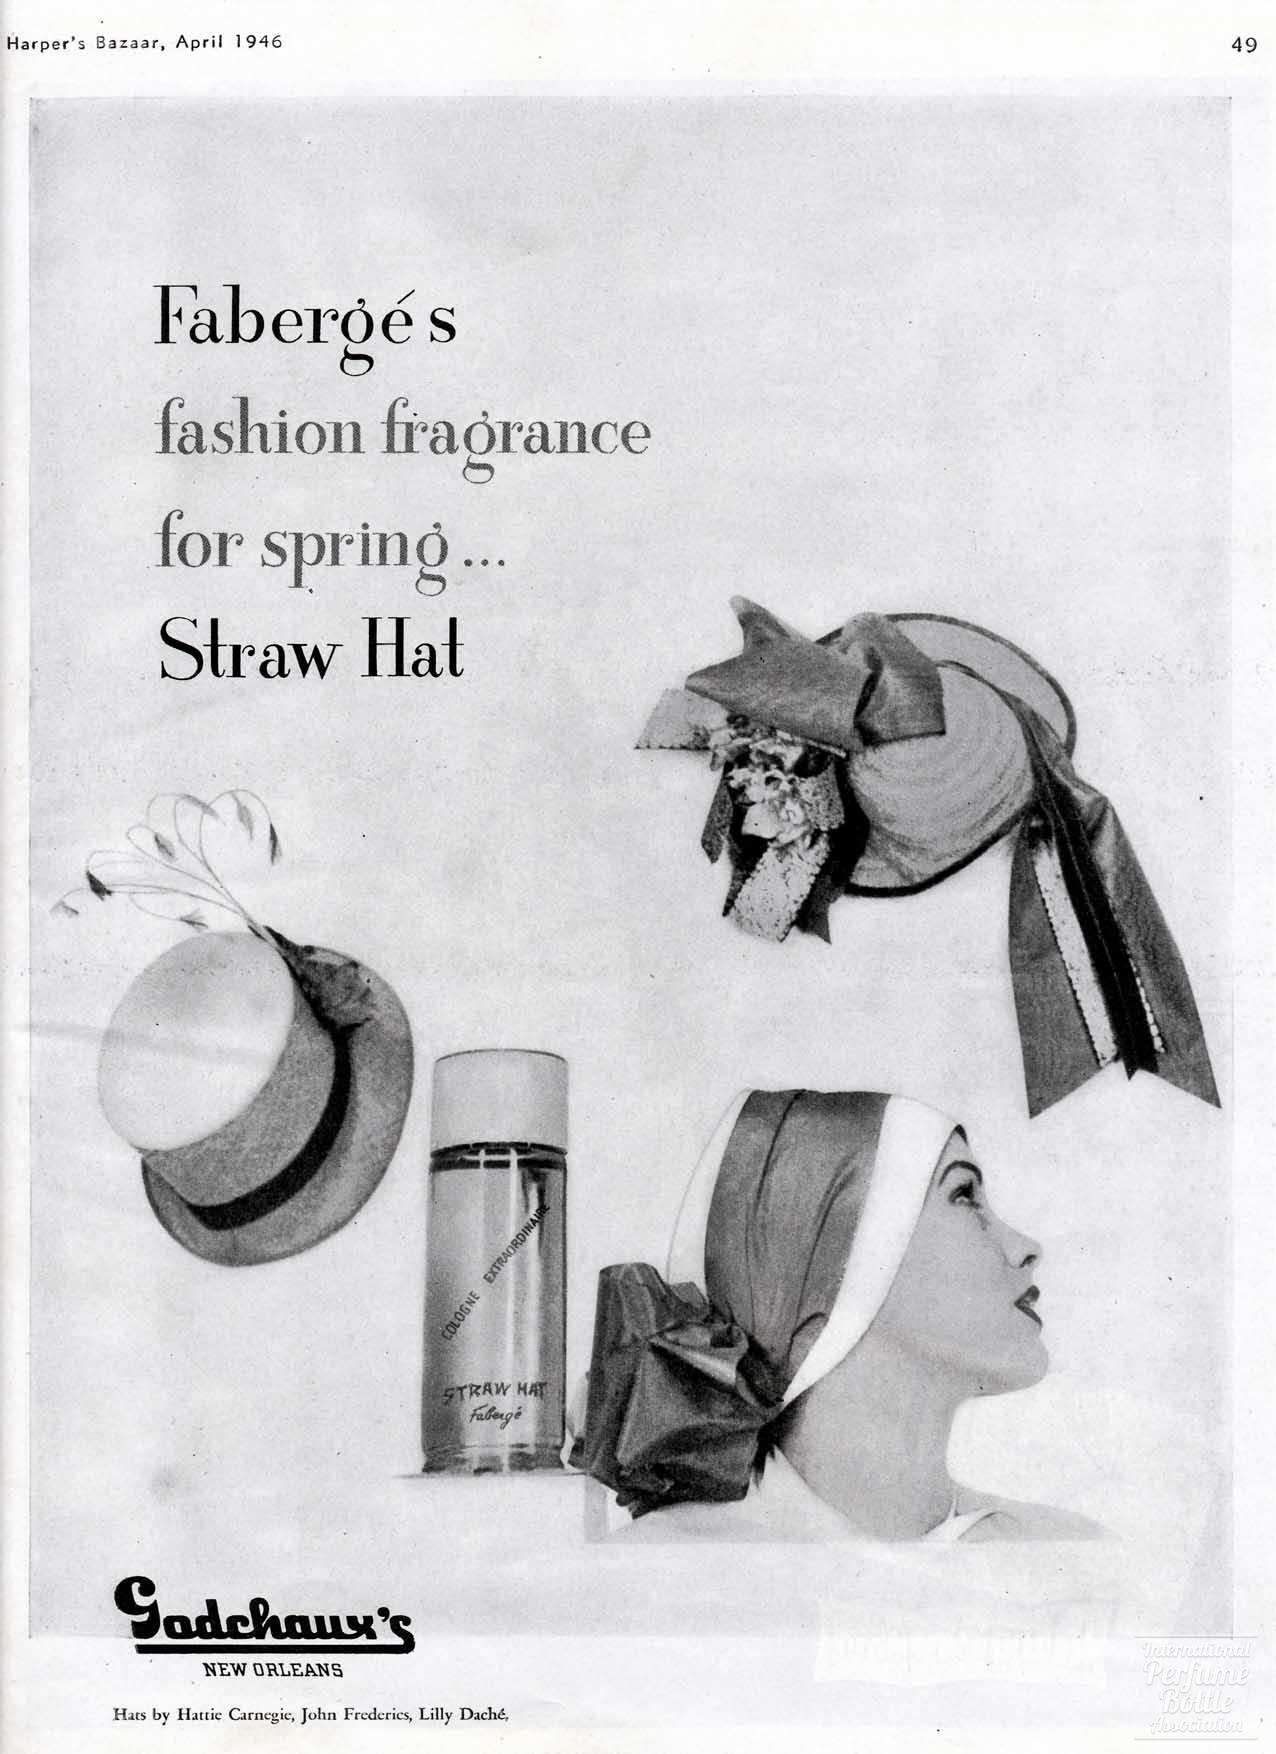 "Straw Hat" by Fabergé Advertisement - 1946